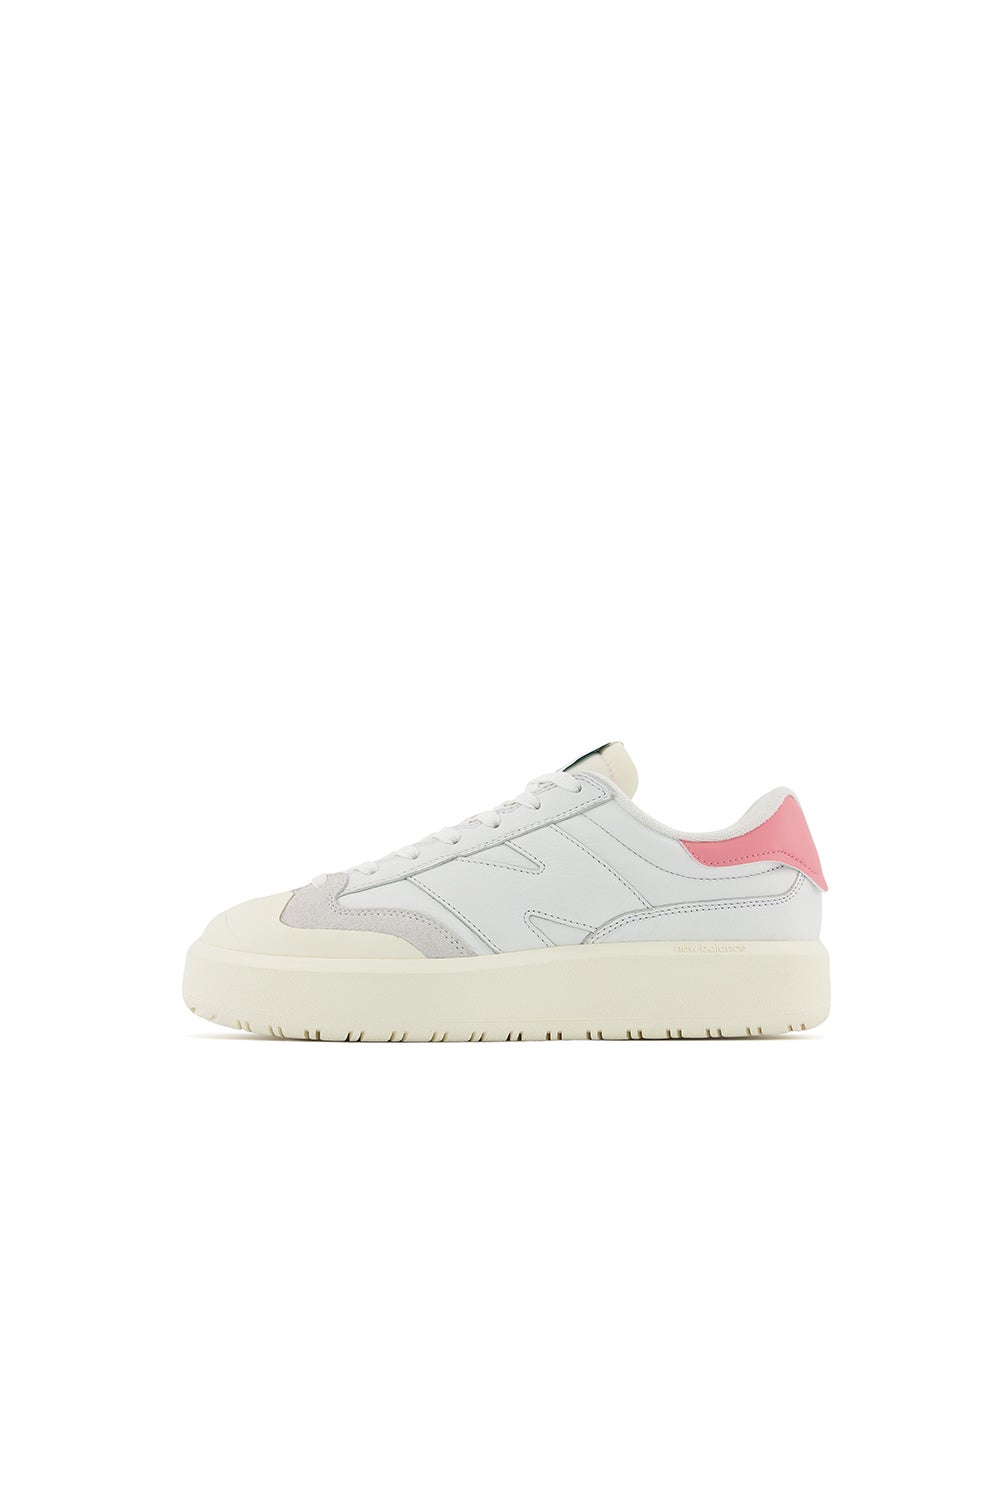 New Balance CT302 White with Natural Pink